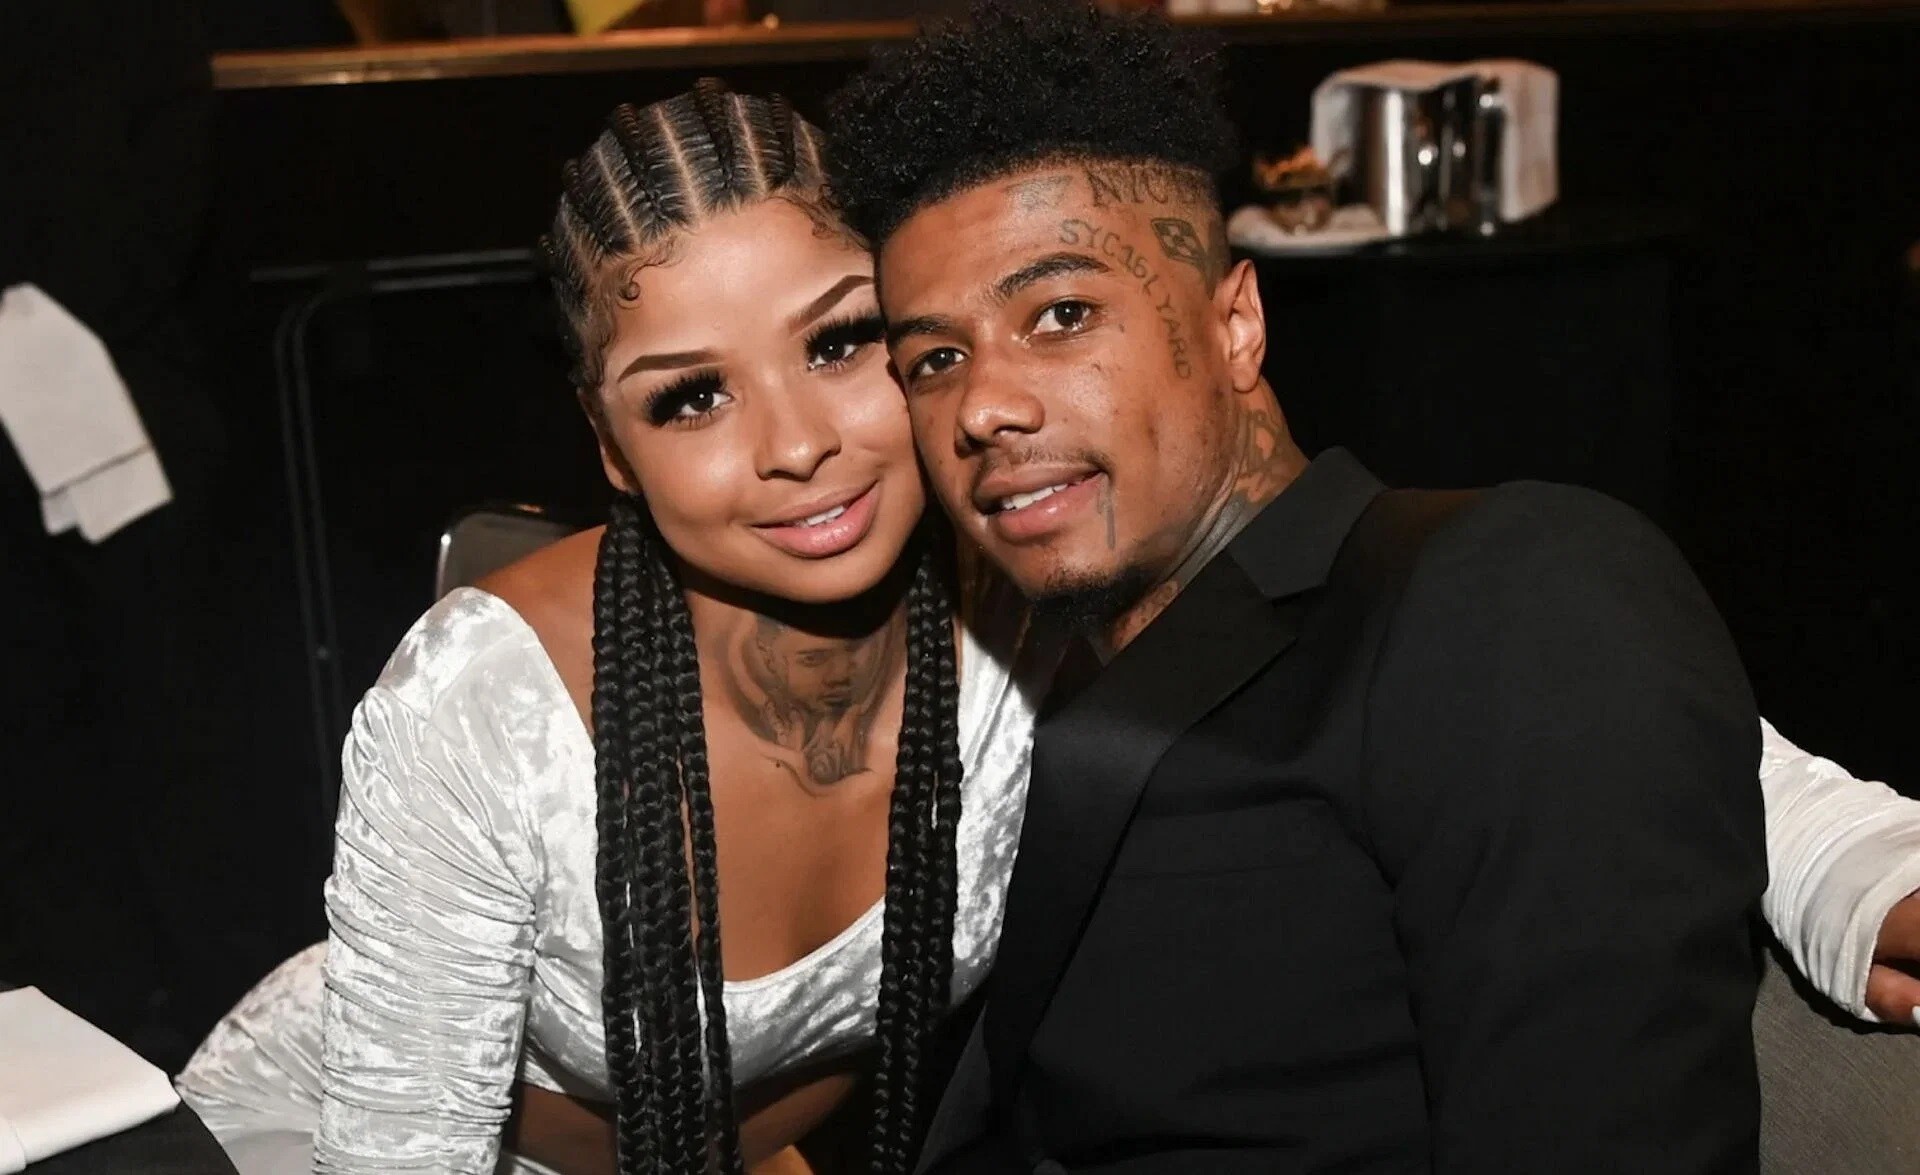 chrisean-rock-gets-blueface-portrait-tattooed-on-her-face